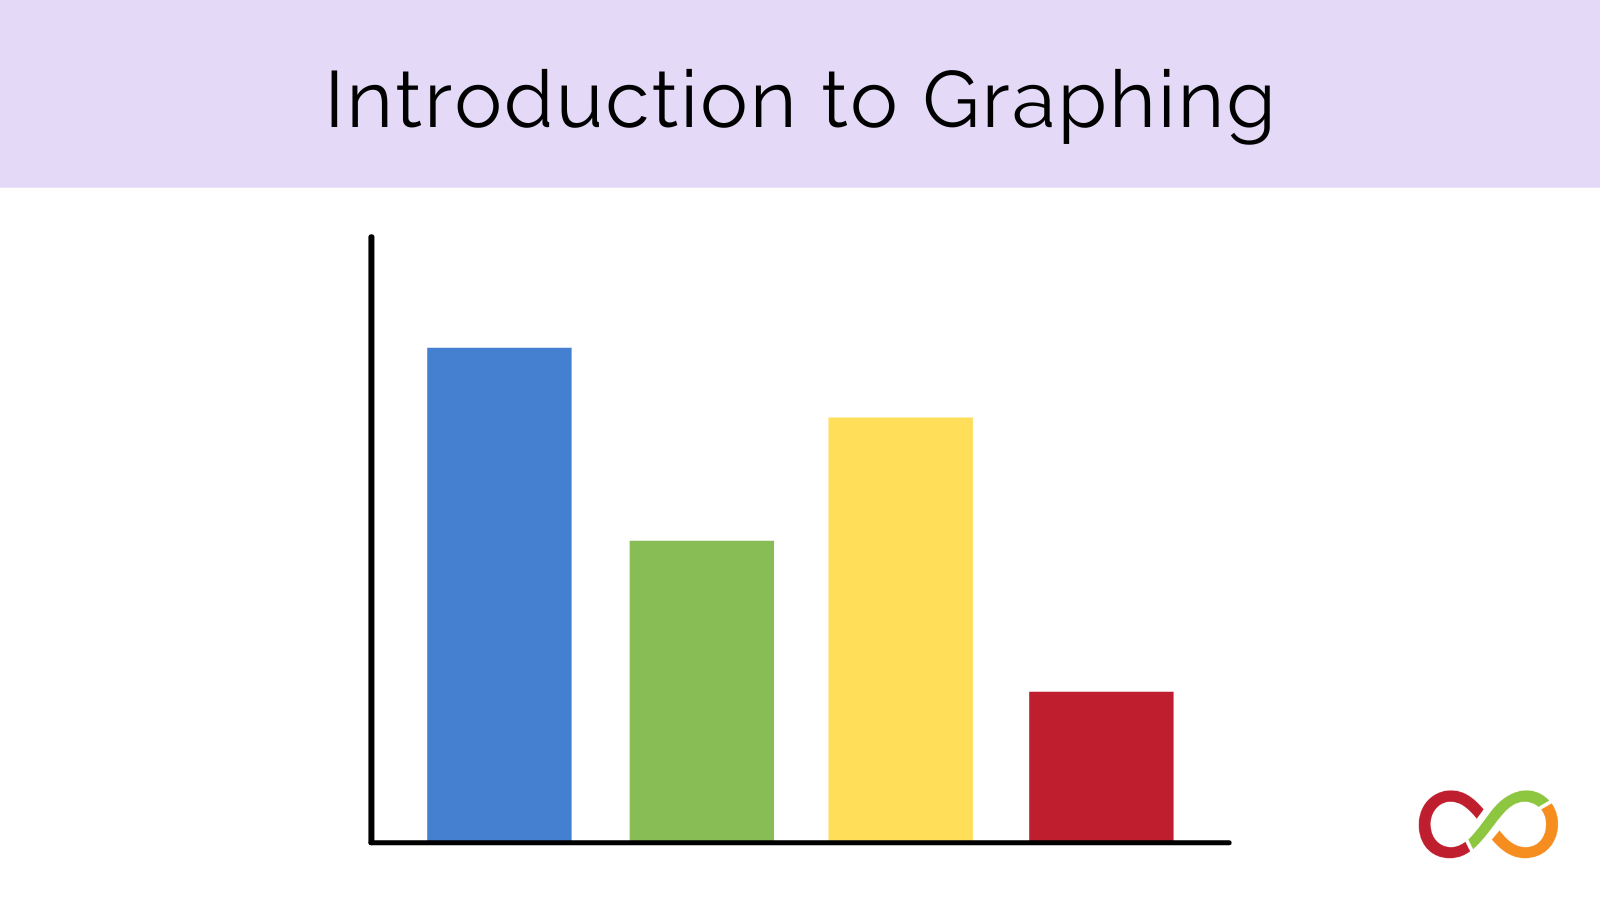 An image linking to the introduction to graphing lesson